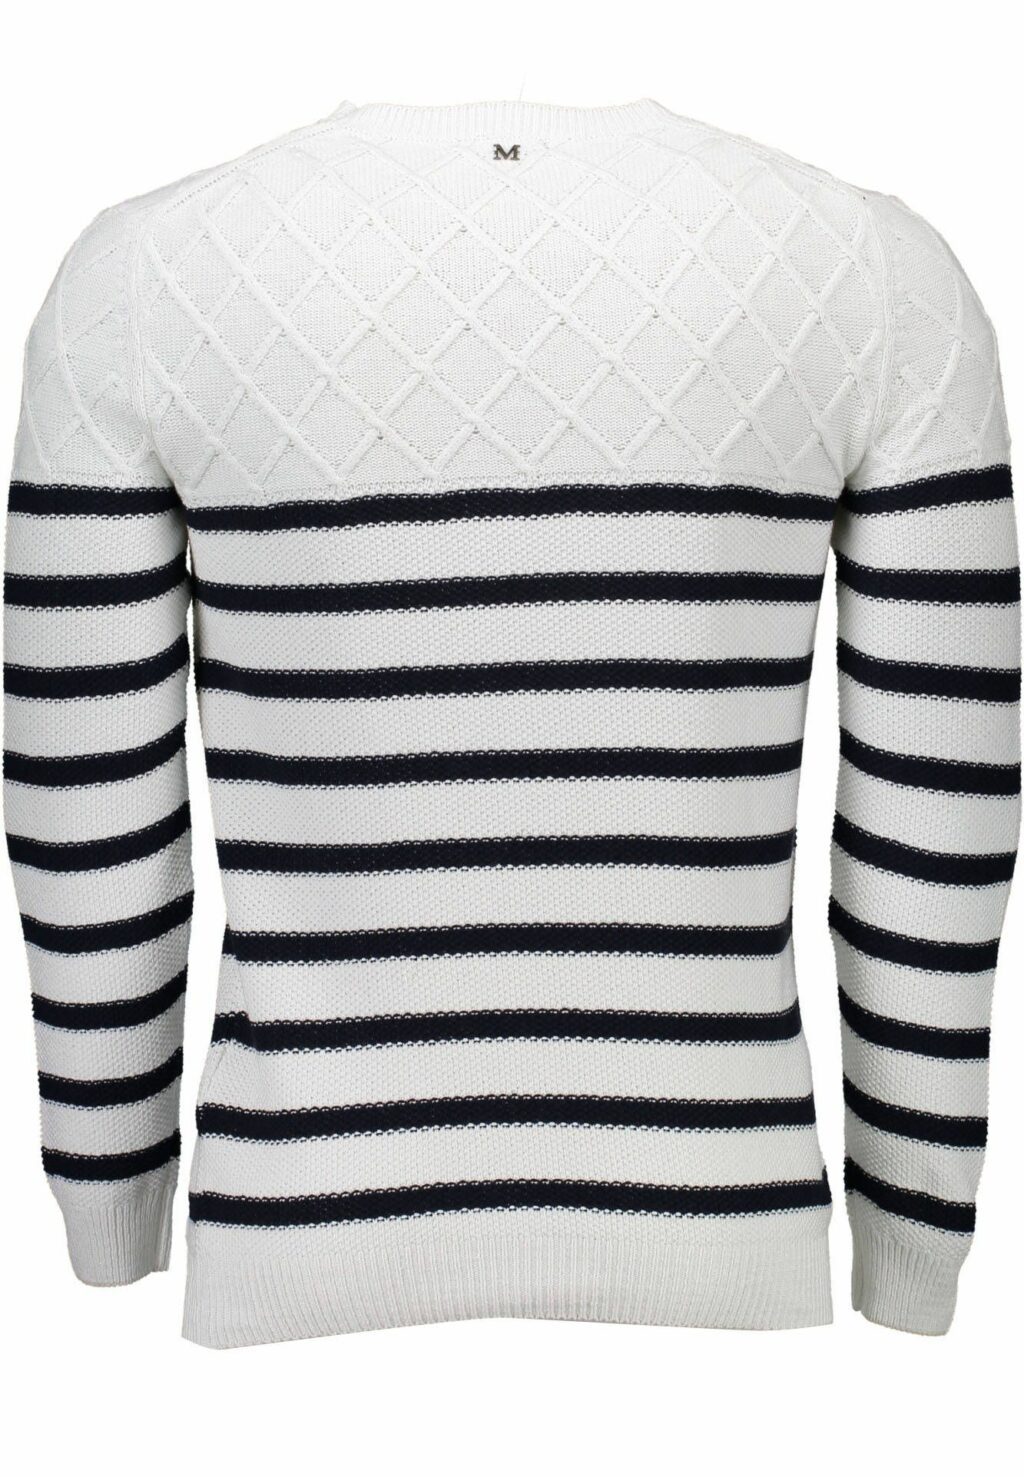 GUESS MARCIANO MEN'S WHITE SWEATER 82H5135443Z_BIANCO_SD98